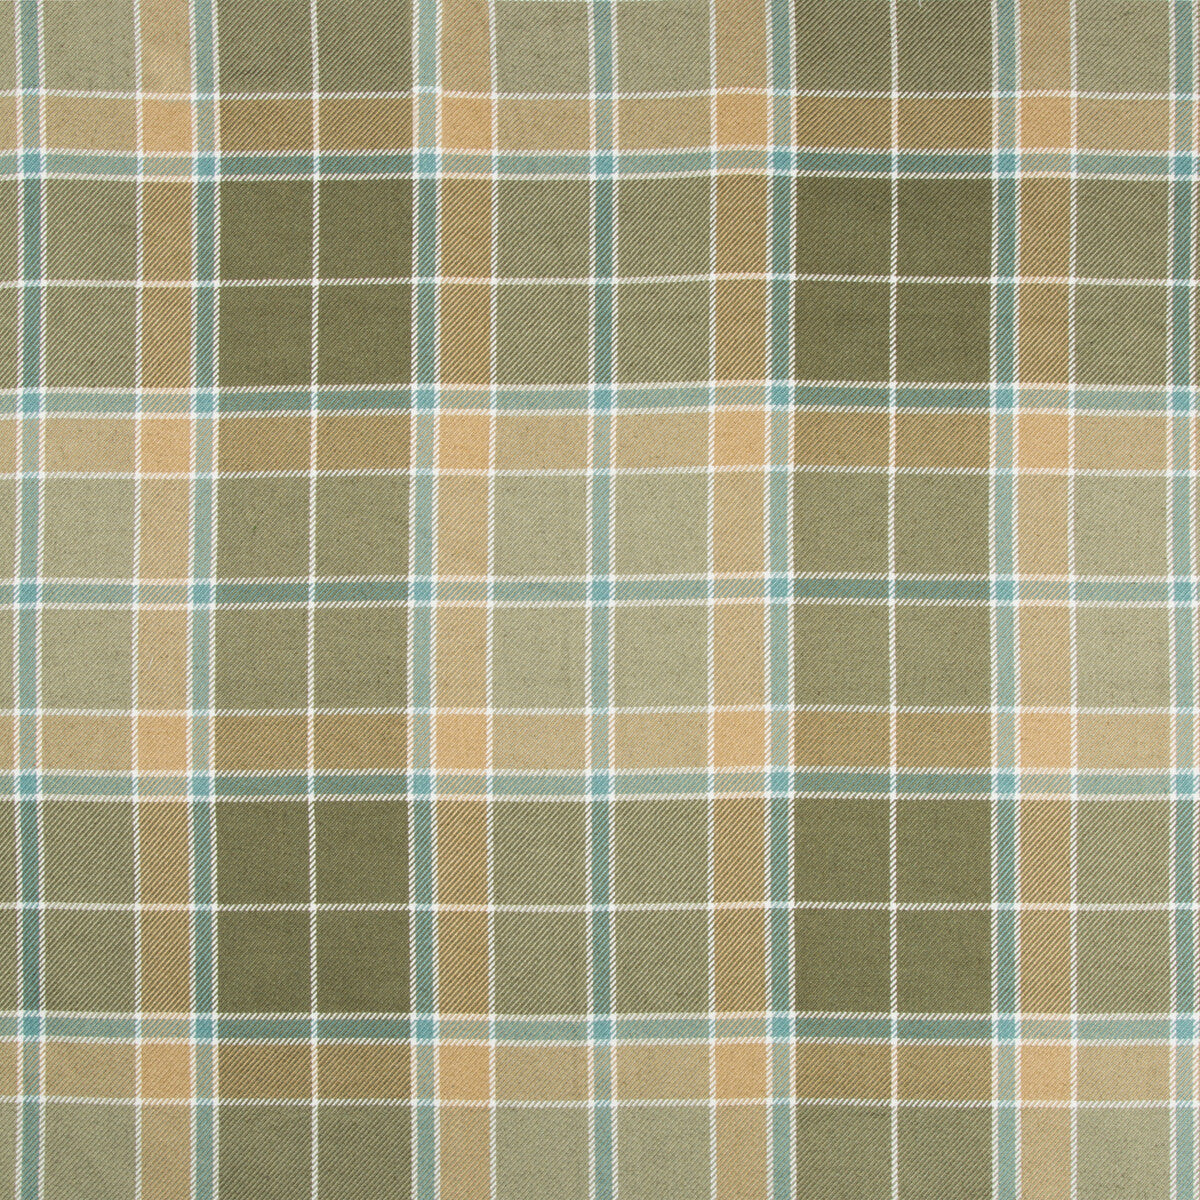 Handsome Plaid fabric in boxwood color - pattern 34793.340.0 - by Kravet Couture in the David Phoenix Well-Suited collection